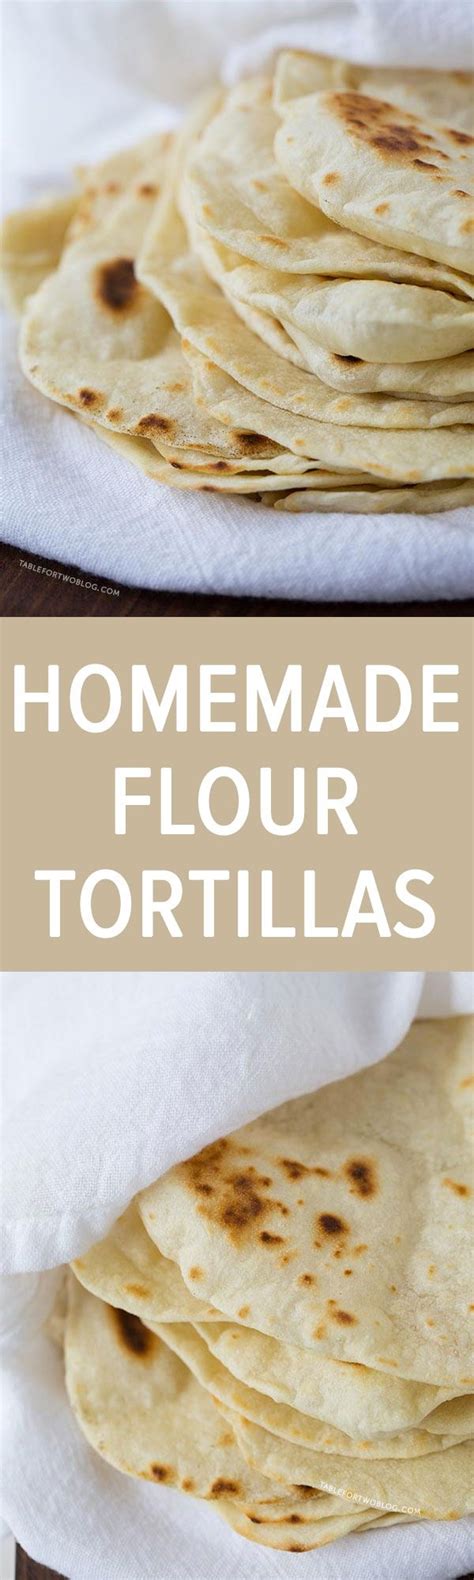 Homemade Flour Tortillas Are Way Better Than Store Bought And So Easy